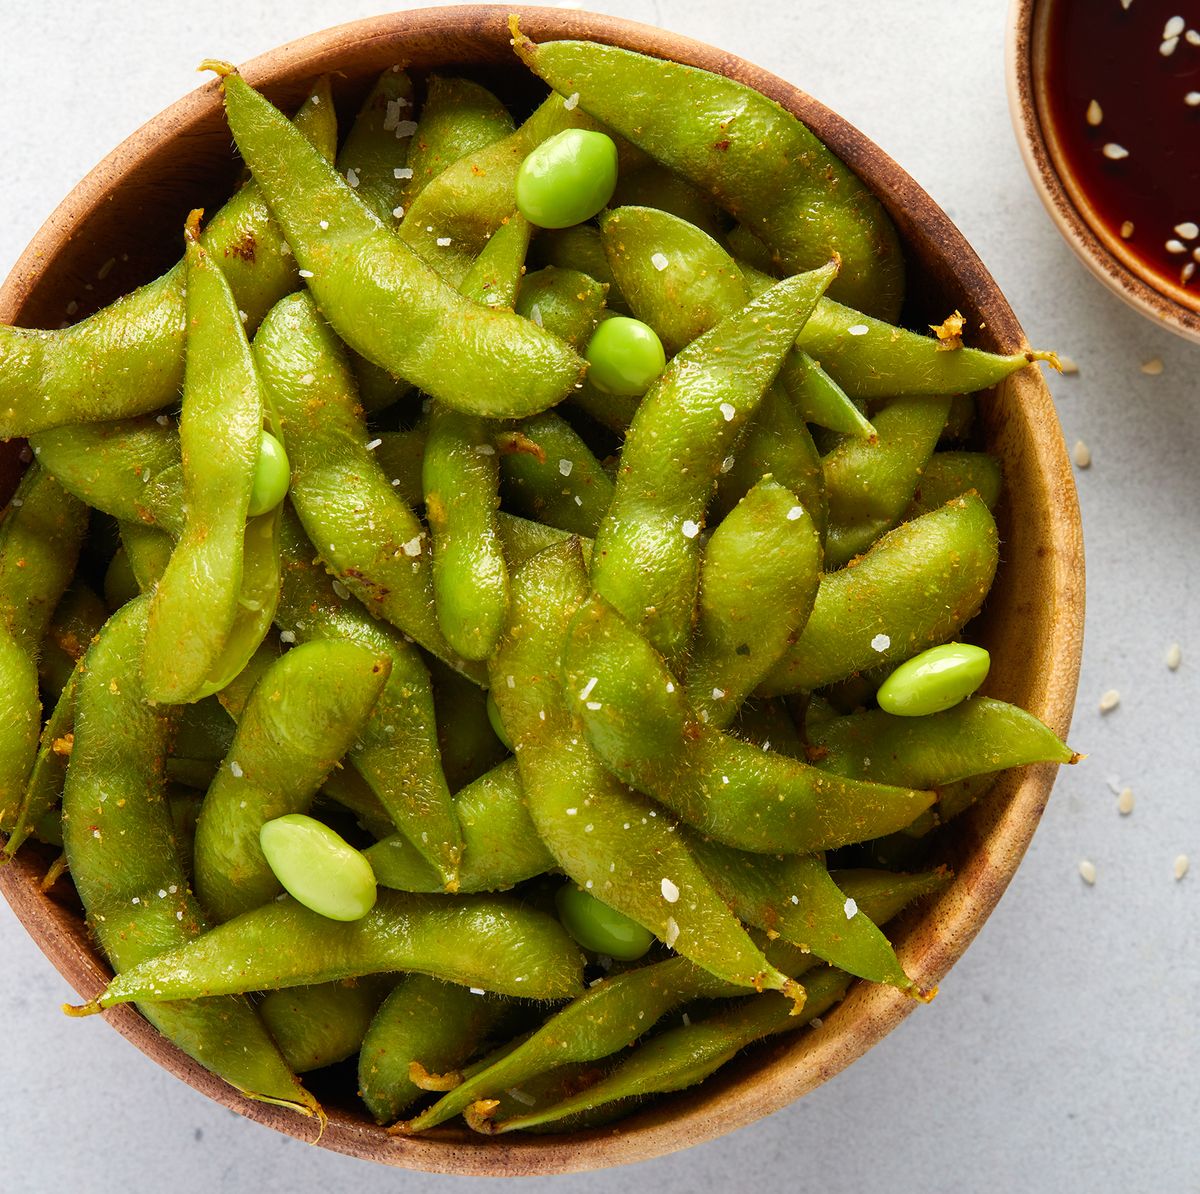 Simple Steamed Edamame - How To Make Steamed Edamame